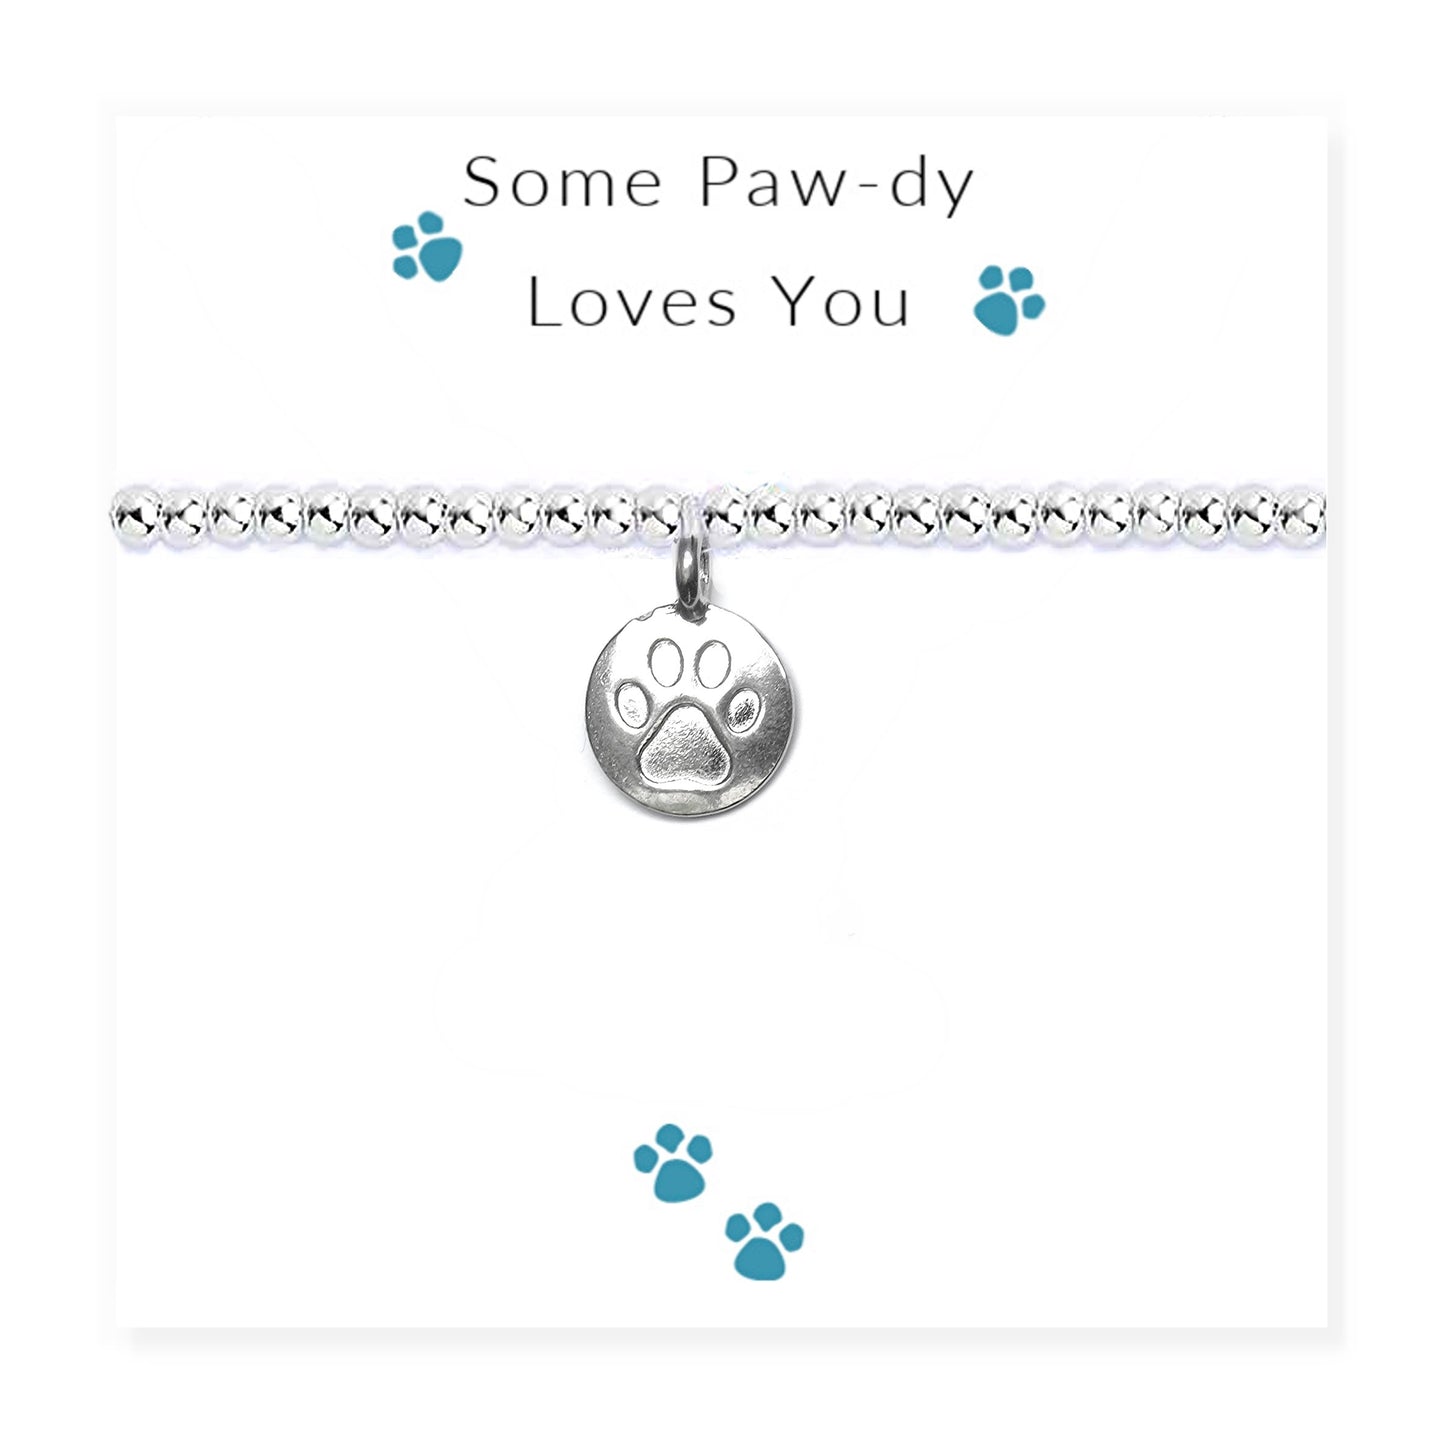 Some Paw-dy Loves You - Bracelet on Message Card